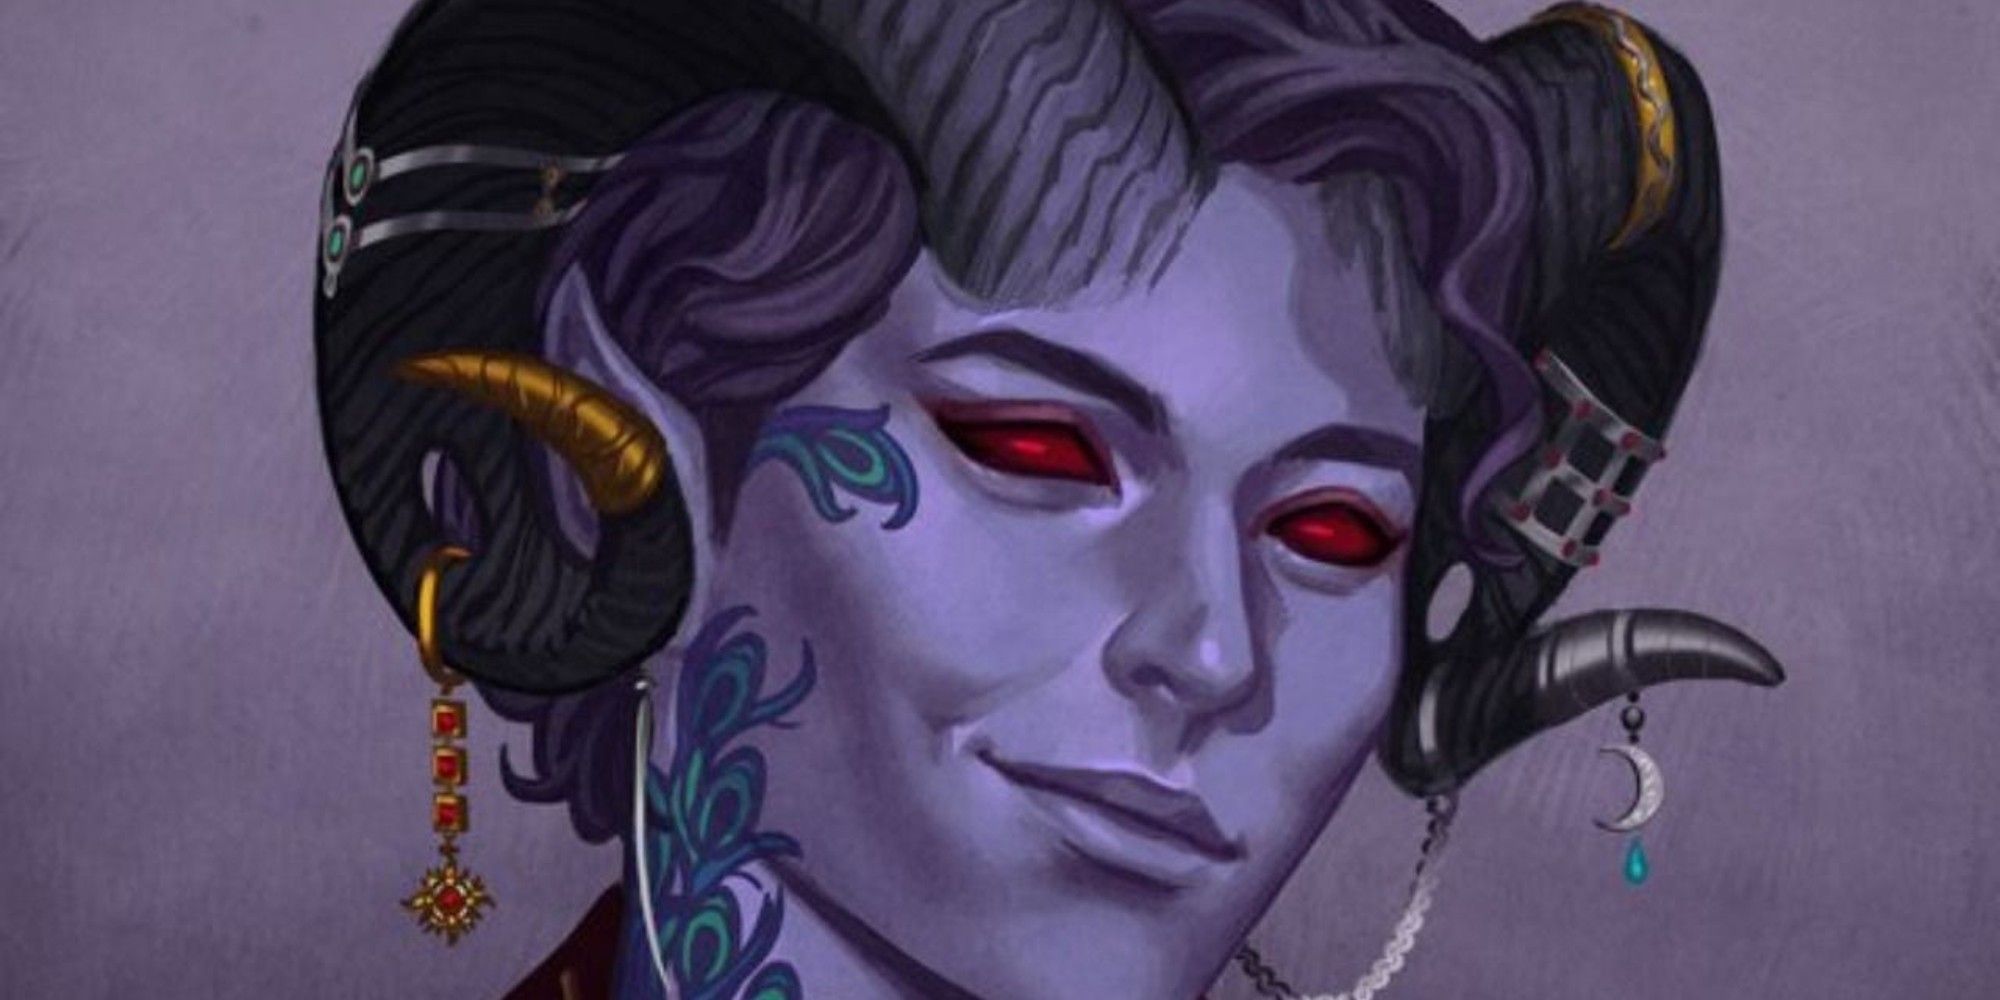 Mollymauk Tealeaf Official Portrait with purple background, looking content